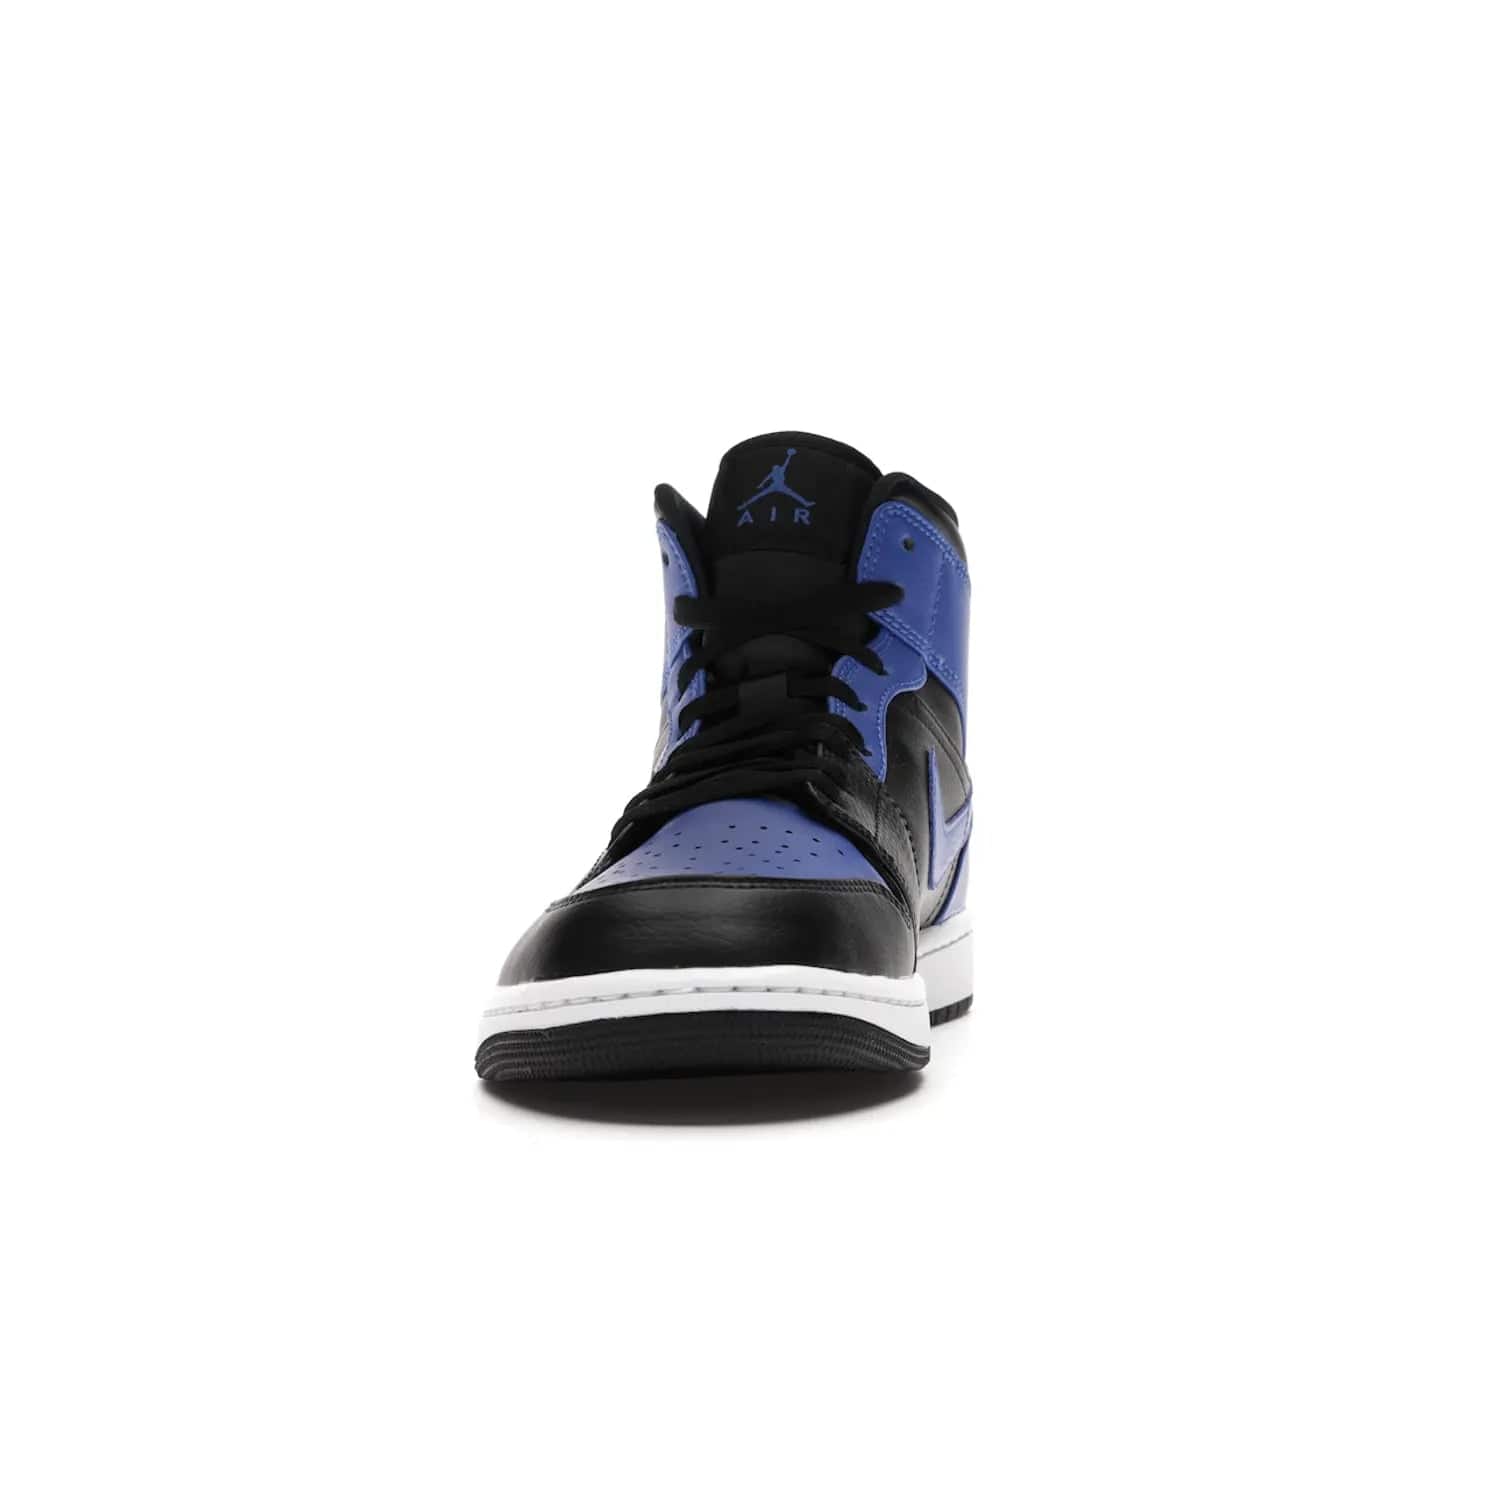 Jordan 1 Mid Hyper Royal Tumbled Leather - Image 11 - Only at www.BallersClubKickz.com - Iconic colorway of the Air Jordan 1 Mid Black Royal Tumbled Leather. Features a black tumbled leather upper, royal blue leather overlays, white midsole & black rubber outsole. Released December 2020. Adds premium style to any collection.